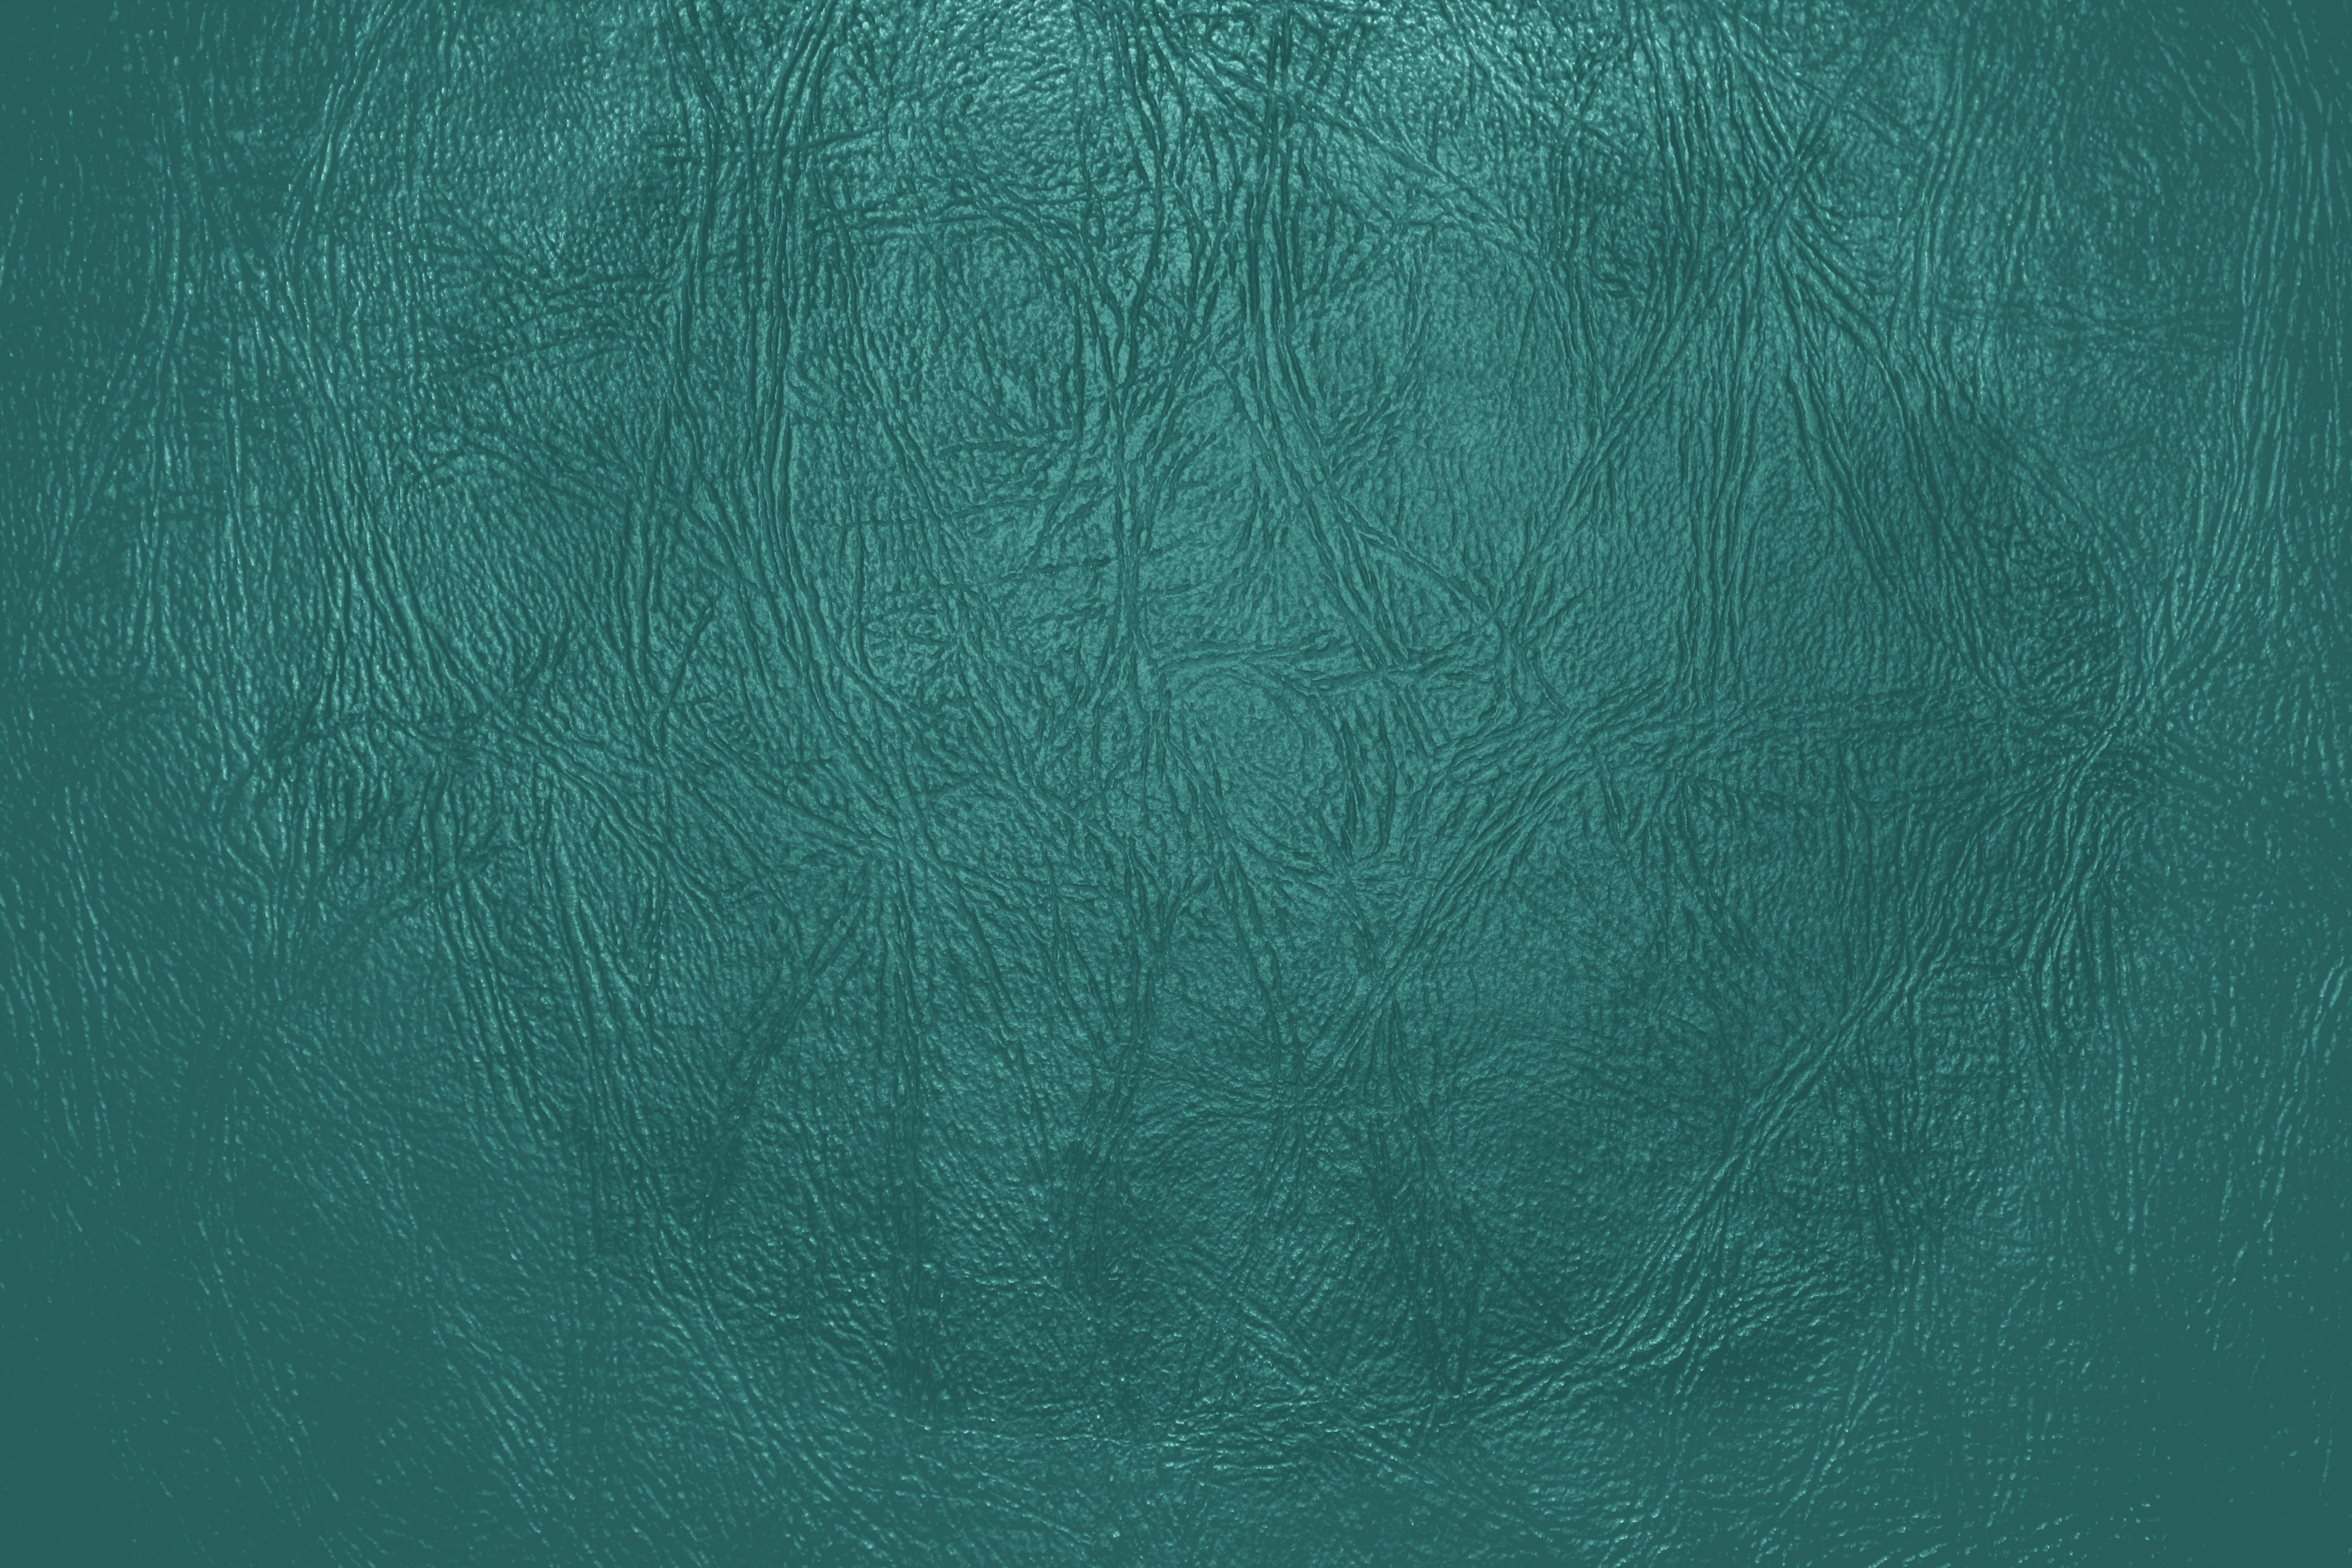 Teal Leather Close Up Texture Picture Photograph Photos